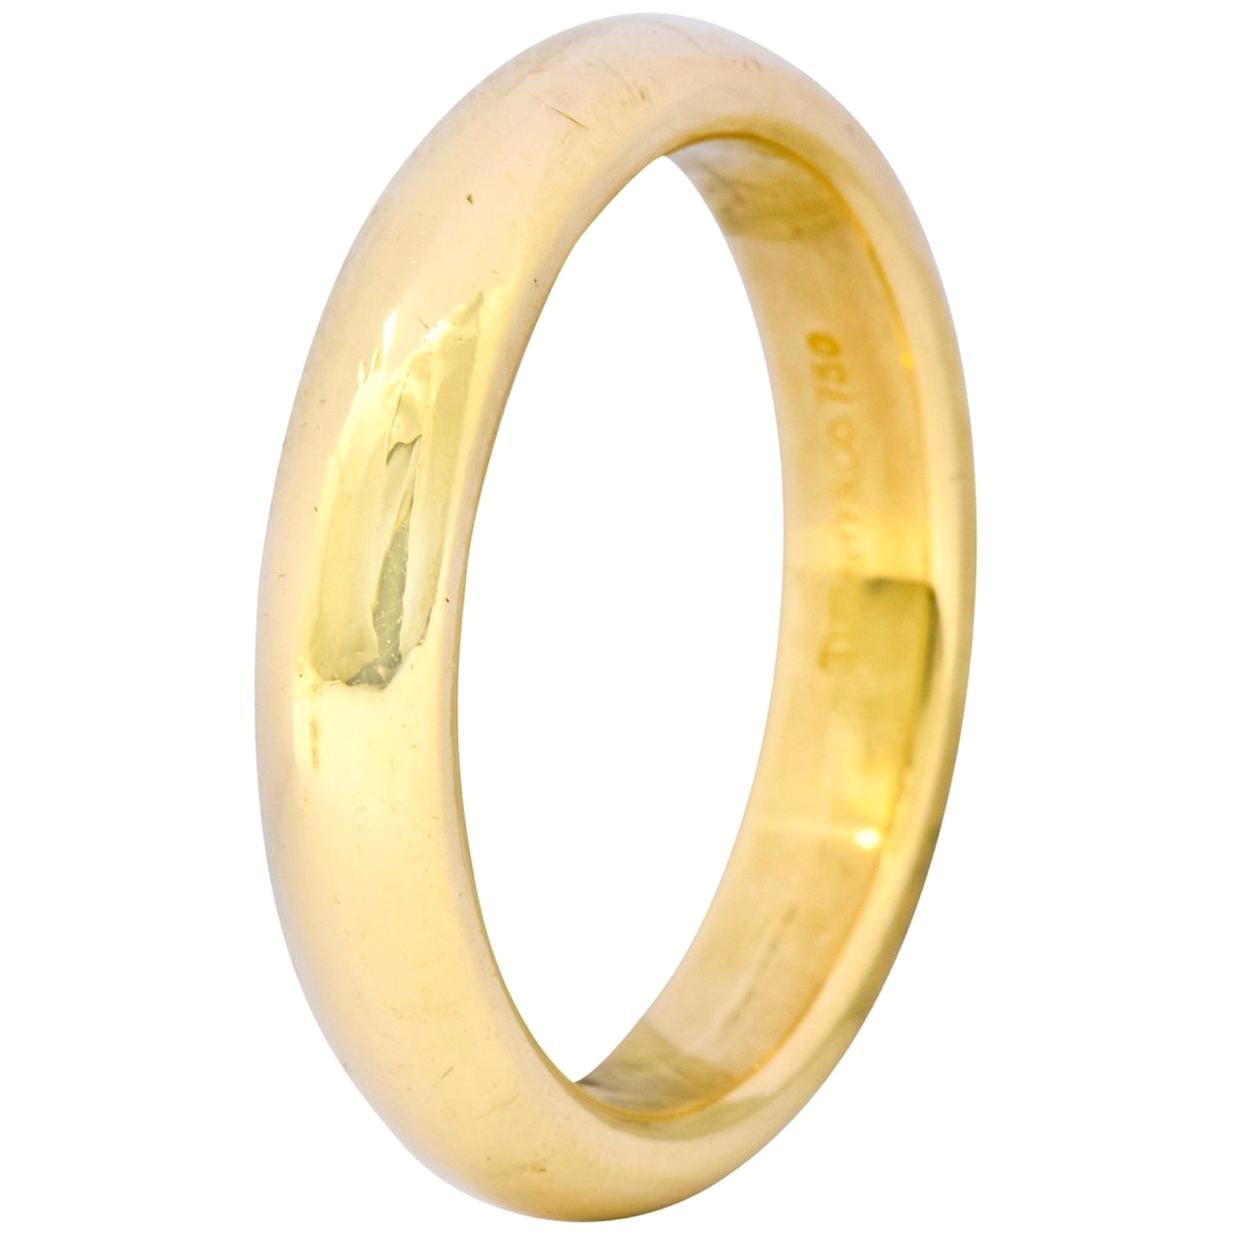 Tiffany & Co. Yellow Gold Wide Plain Wedding Band Ring 8.5 Grams, Estate